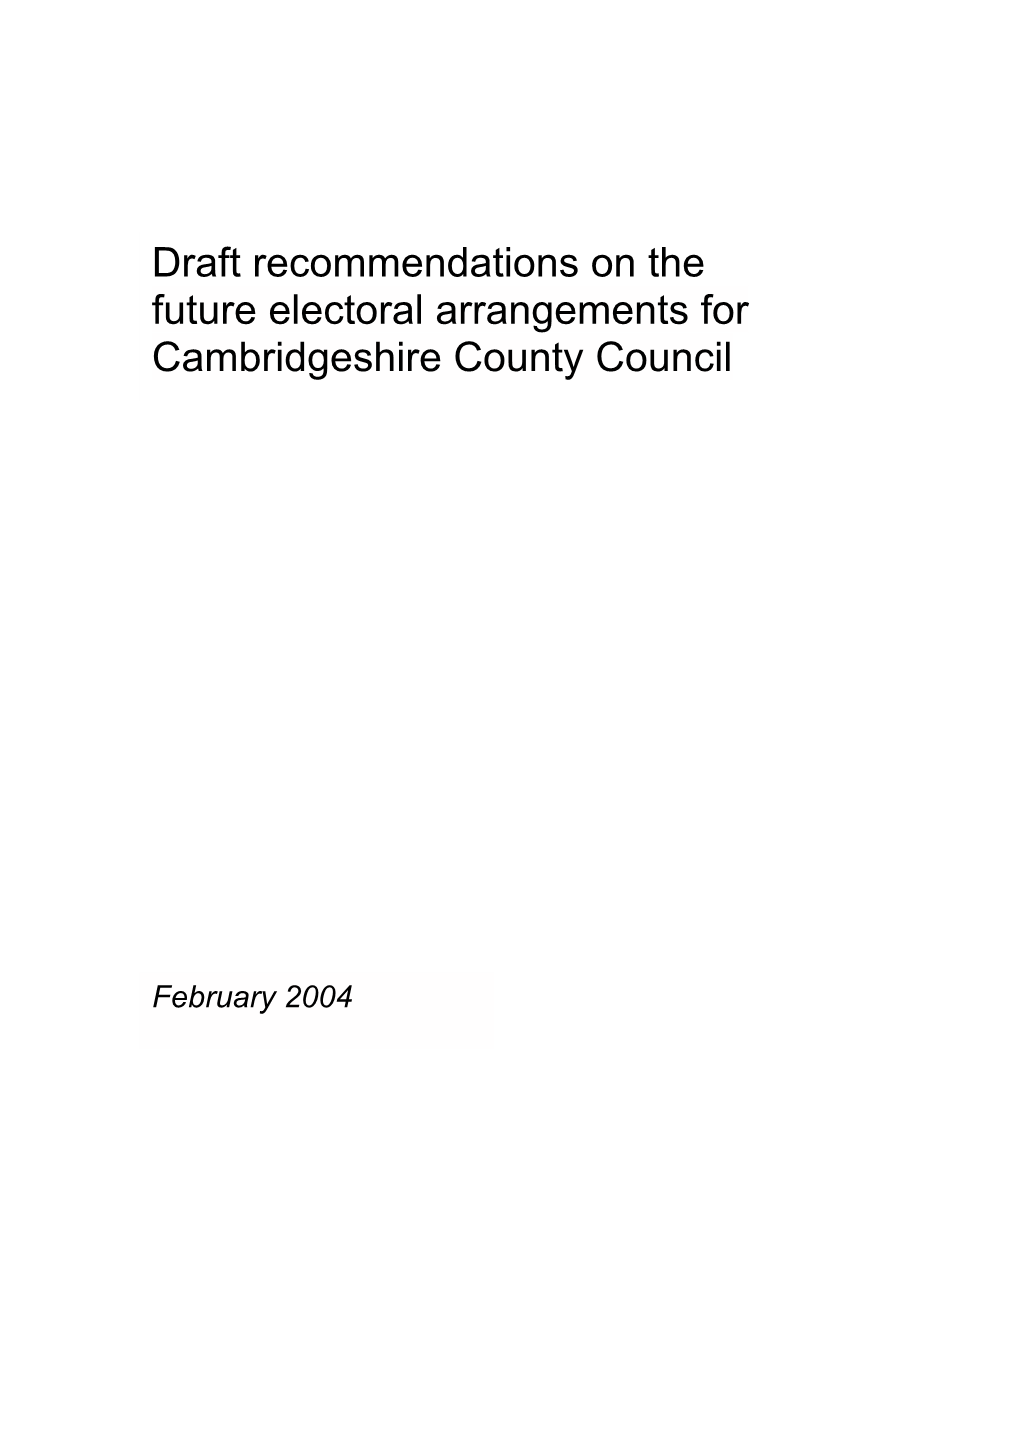 Draft Recommendations on the Future Electoral Arrangements for Cambridgeshire County Council